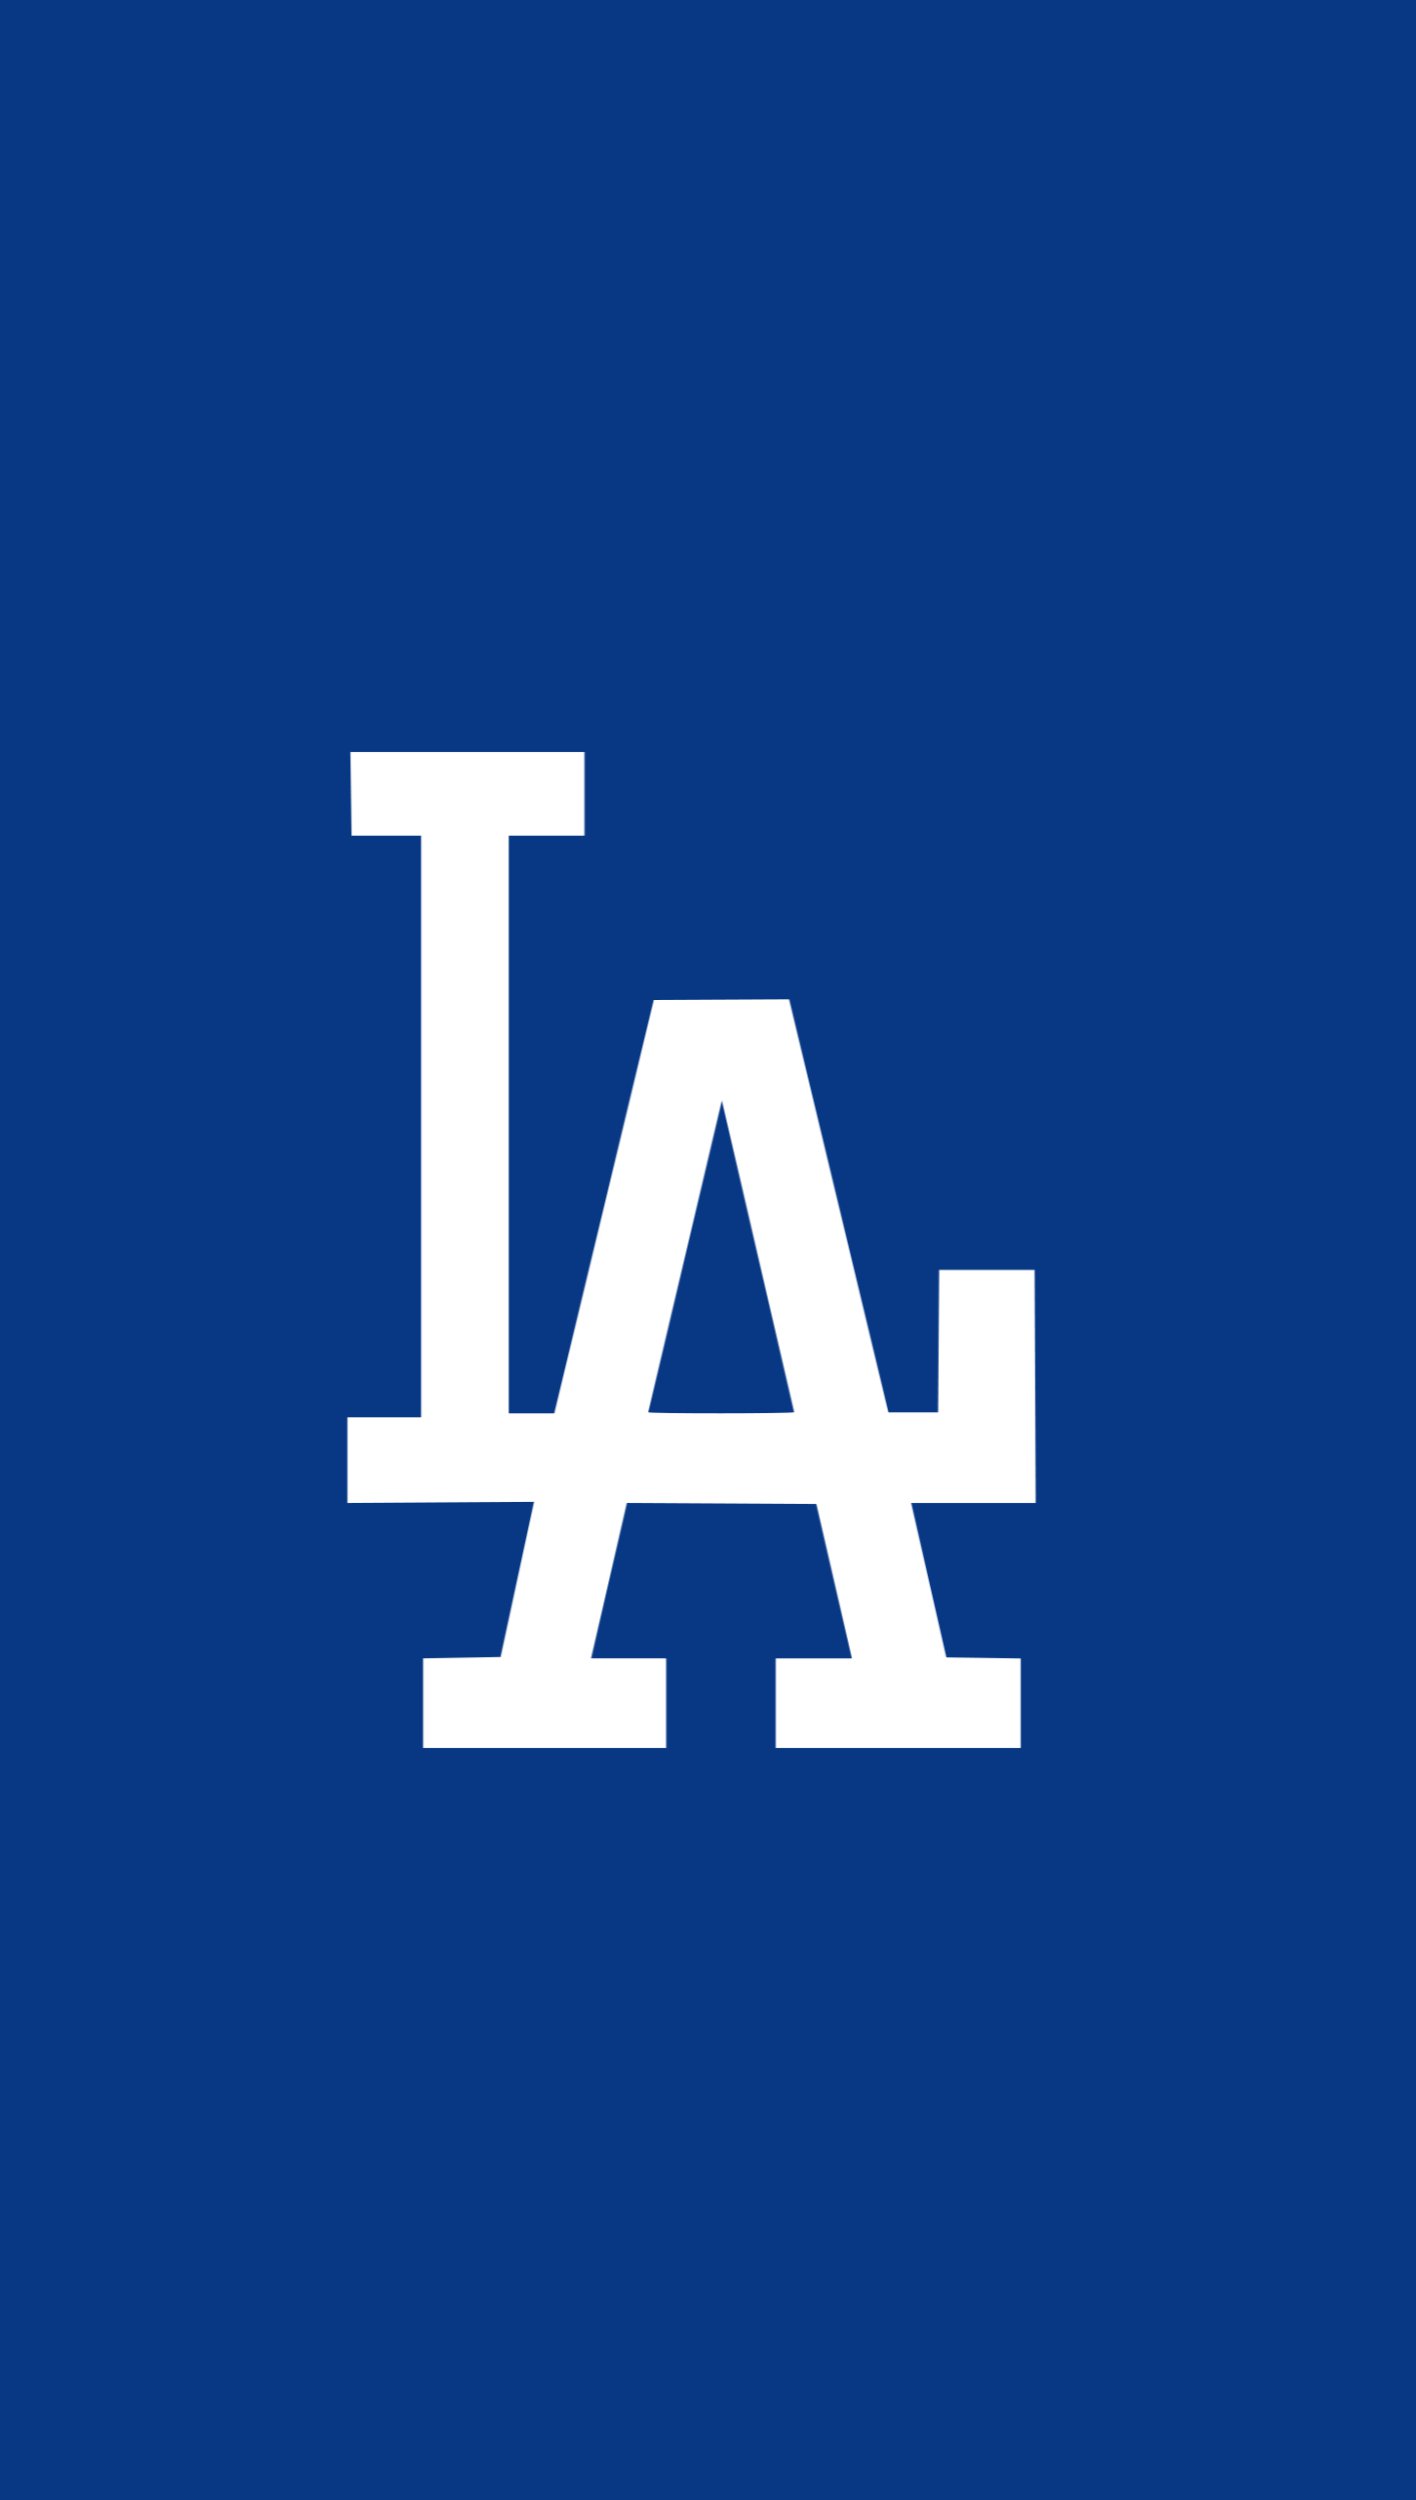 I made a few simple Dodgers wallpaper in various resolutions